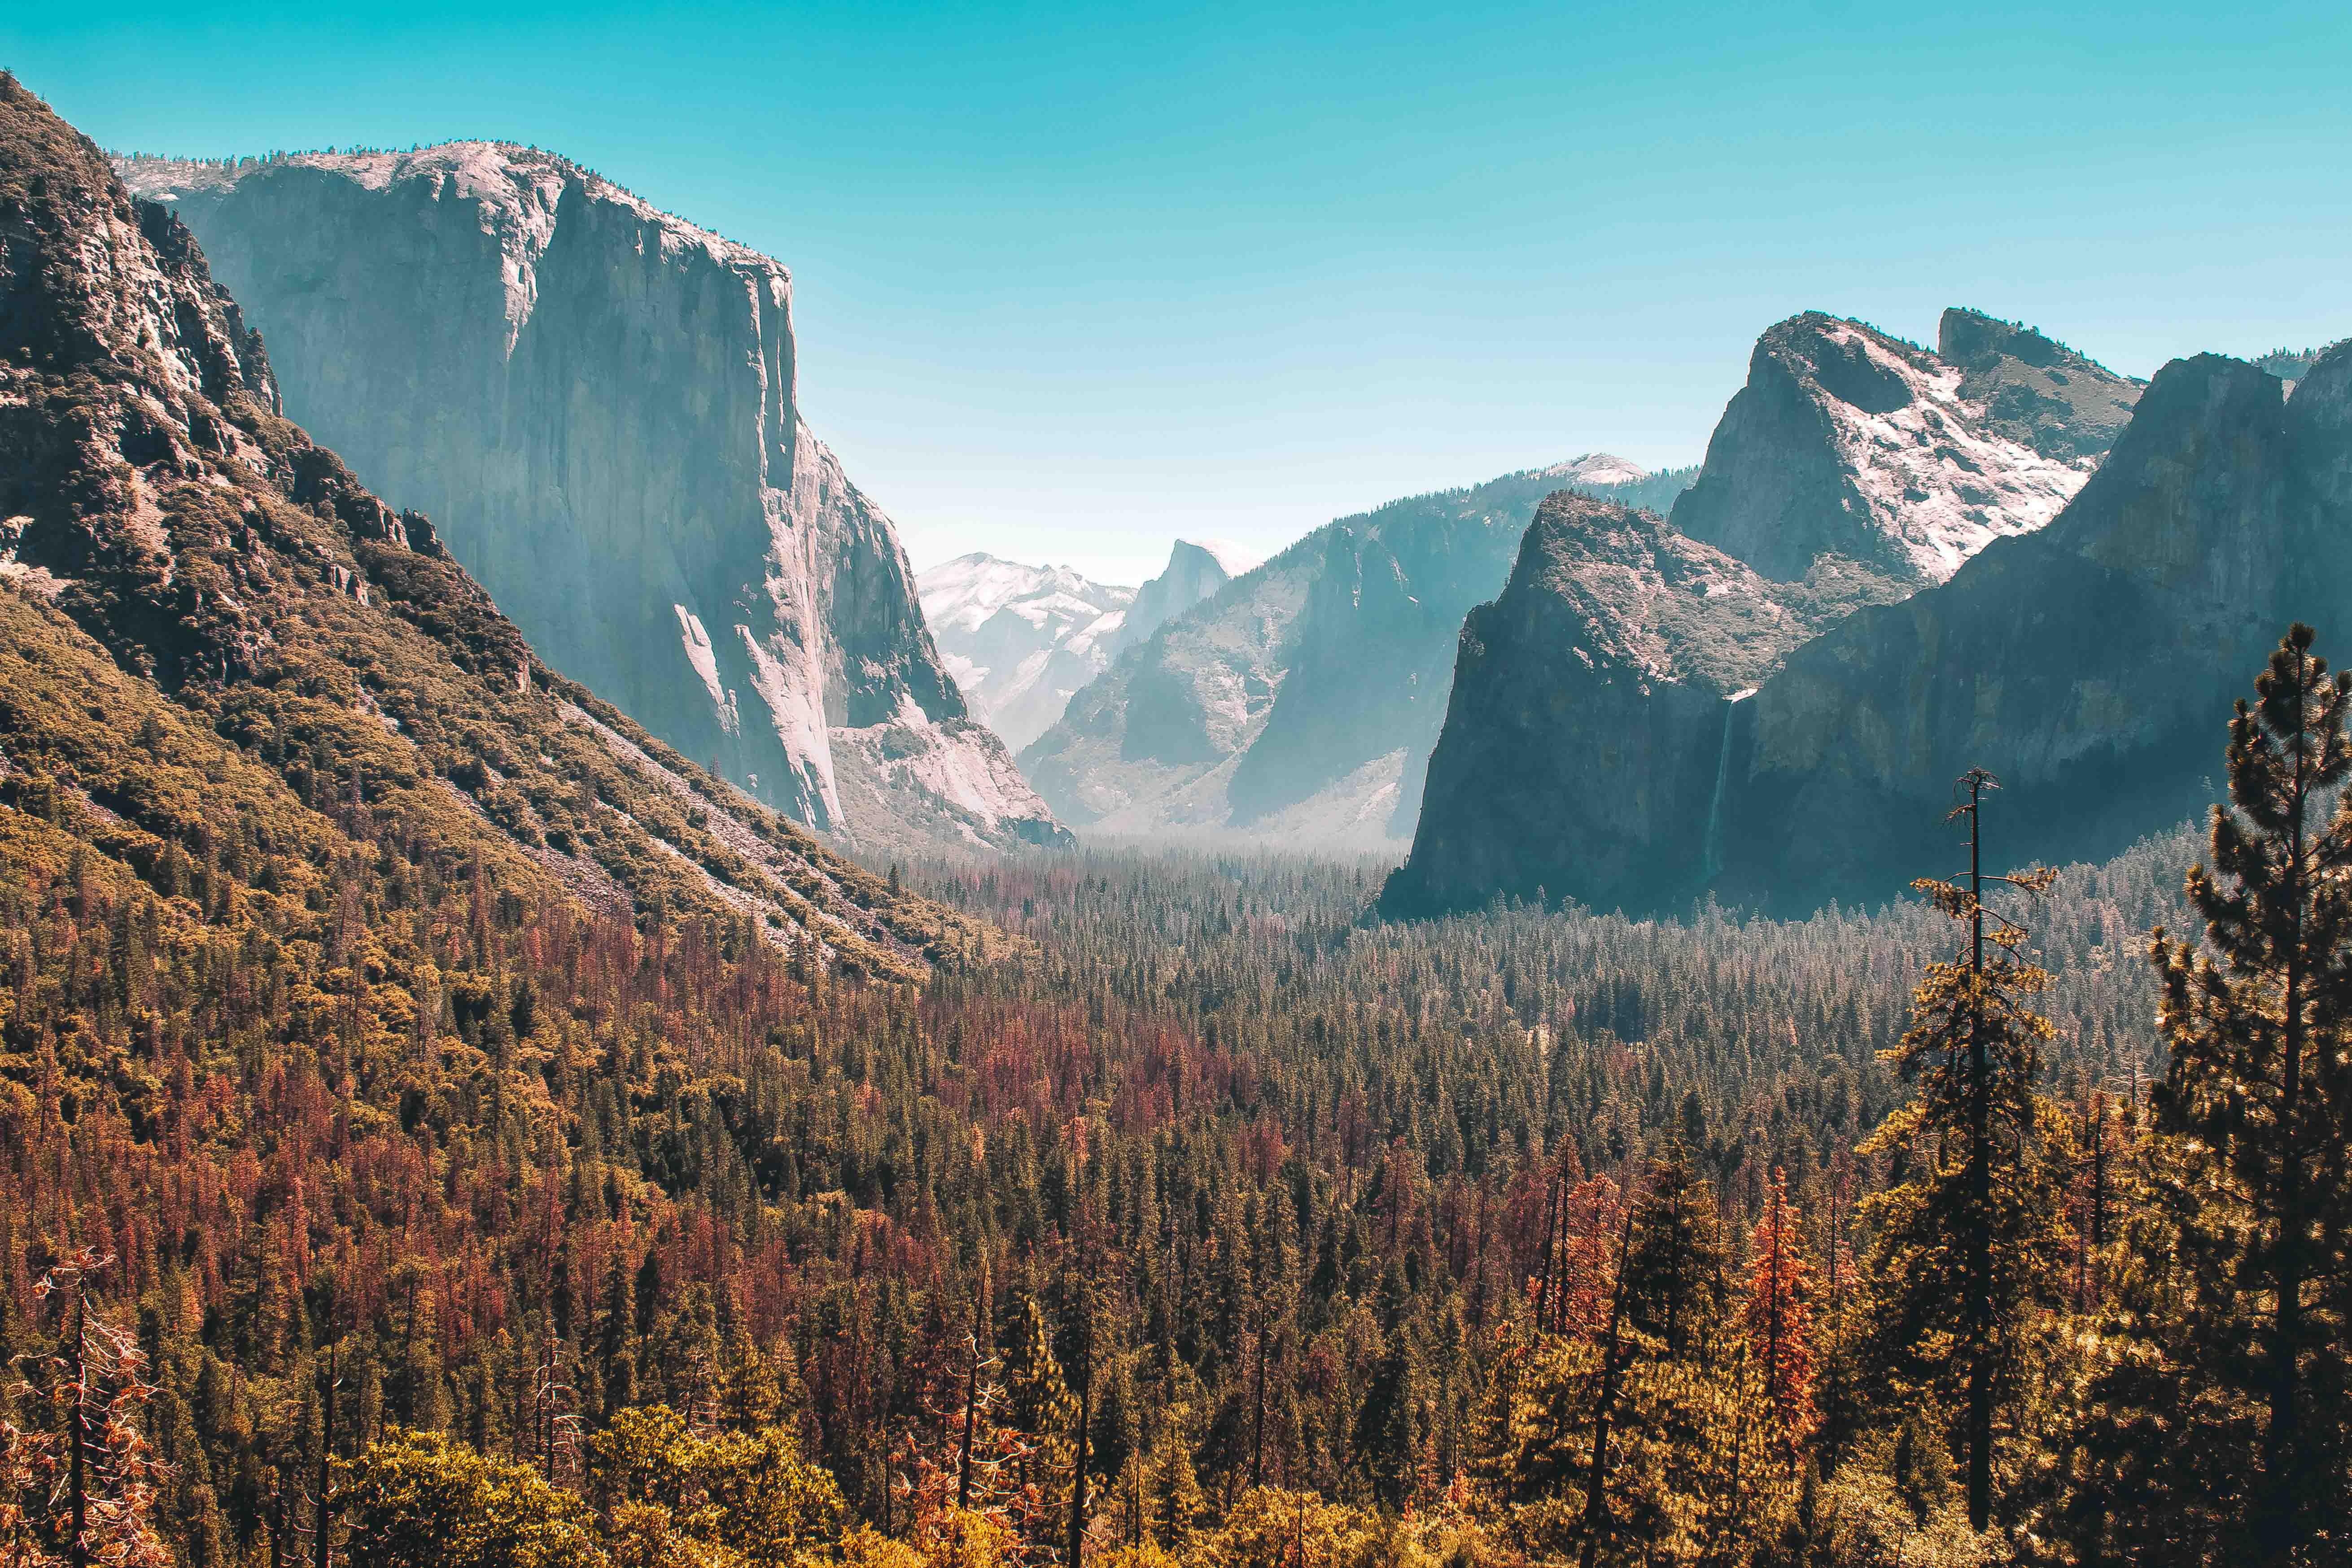 Visiting Yosemite National Park? Check out this guide.